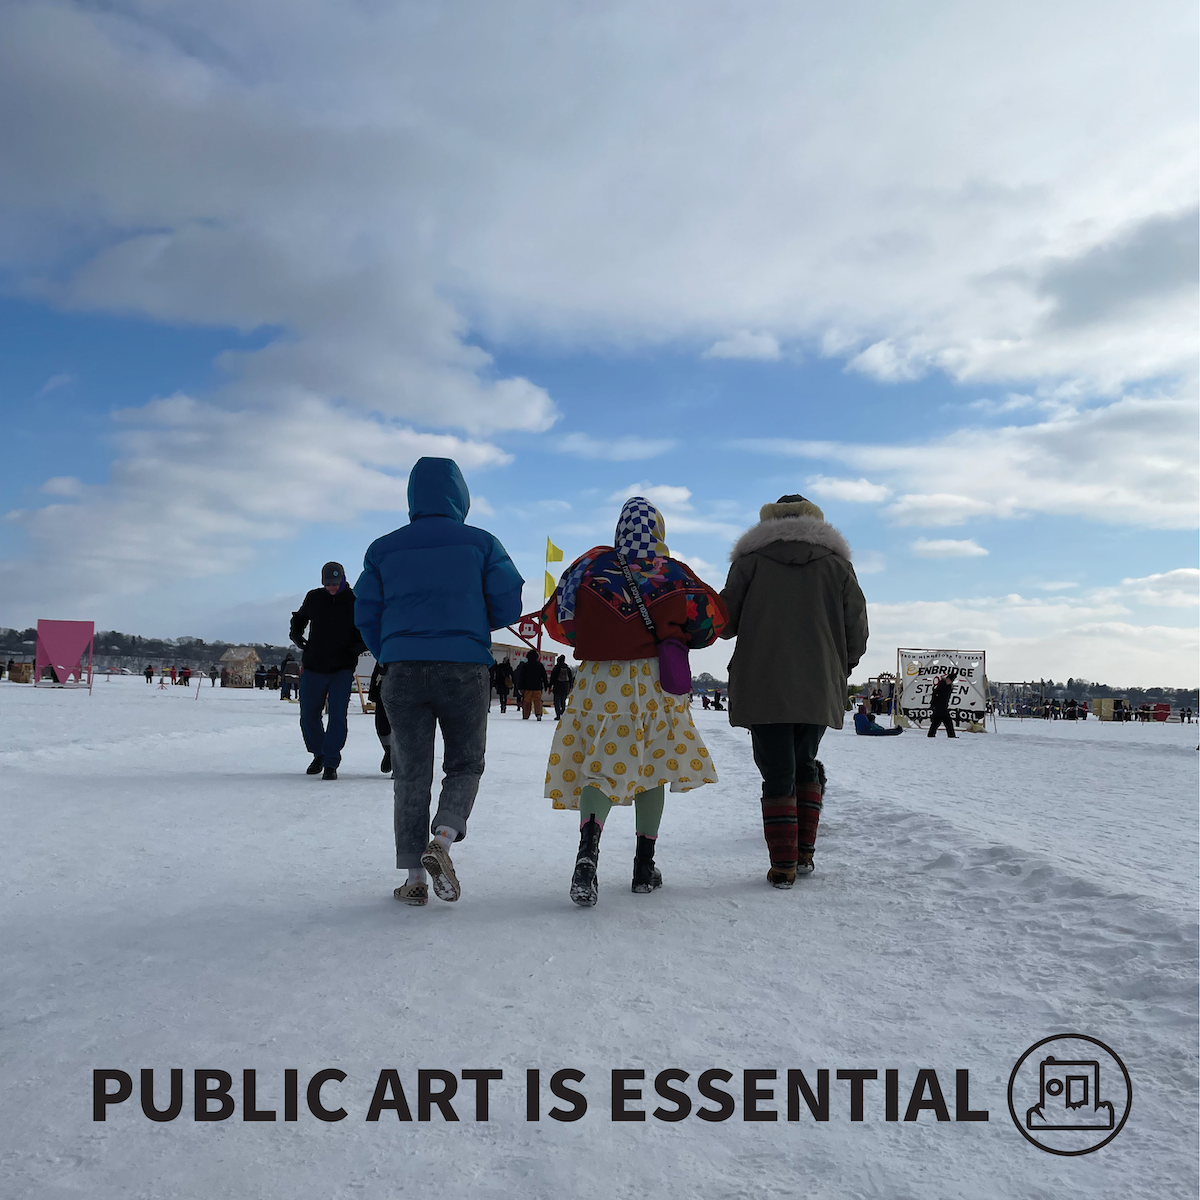 Art in the public sphere is essential!